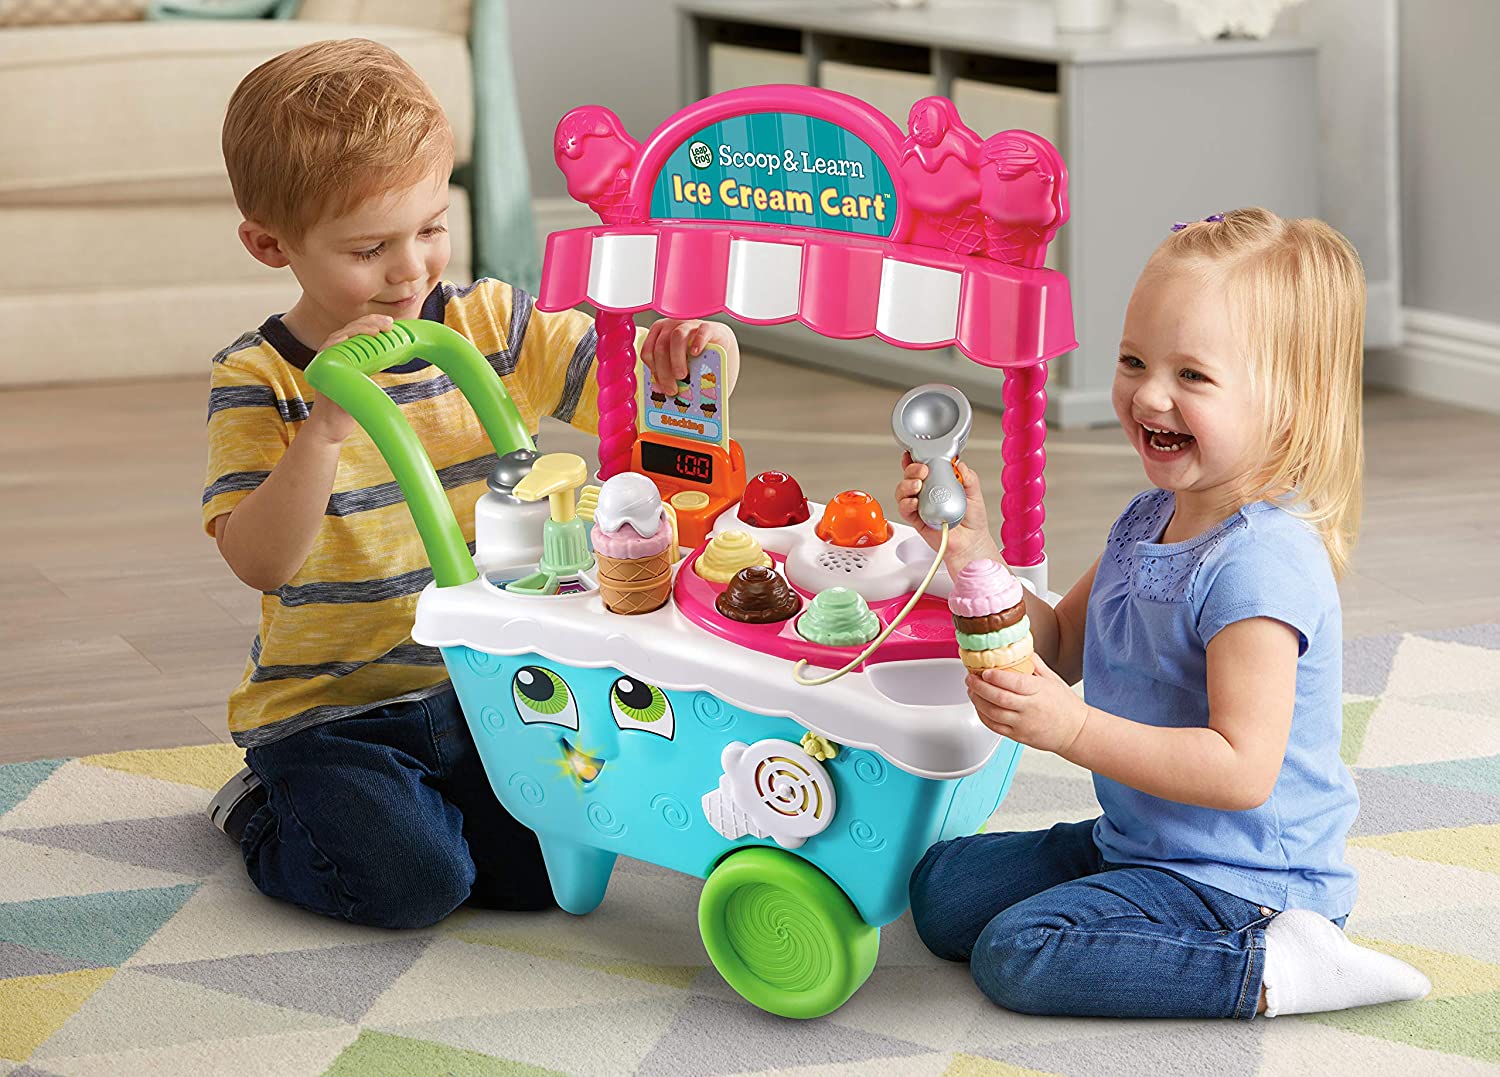 LeapFrog Scoop and Learn Ice Cream Cart - for Ages 2 Years and Up